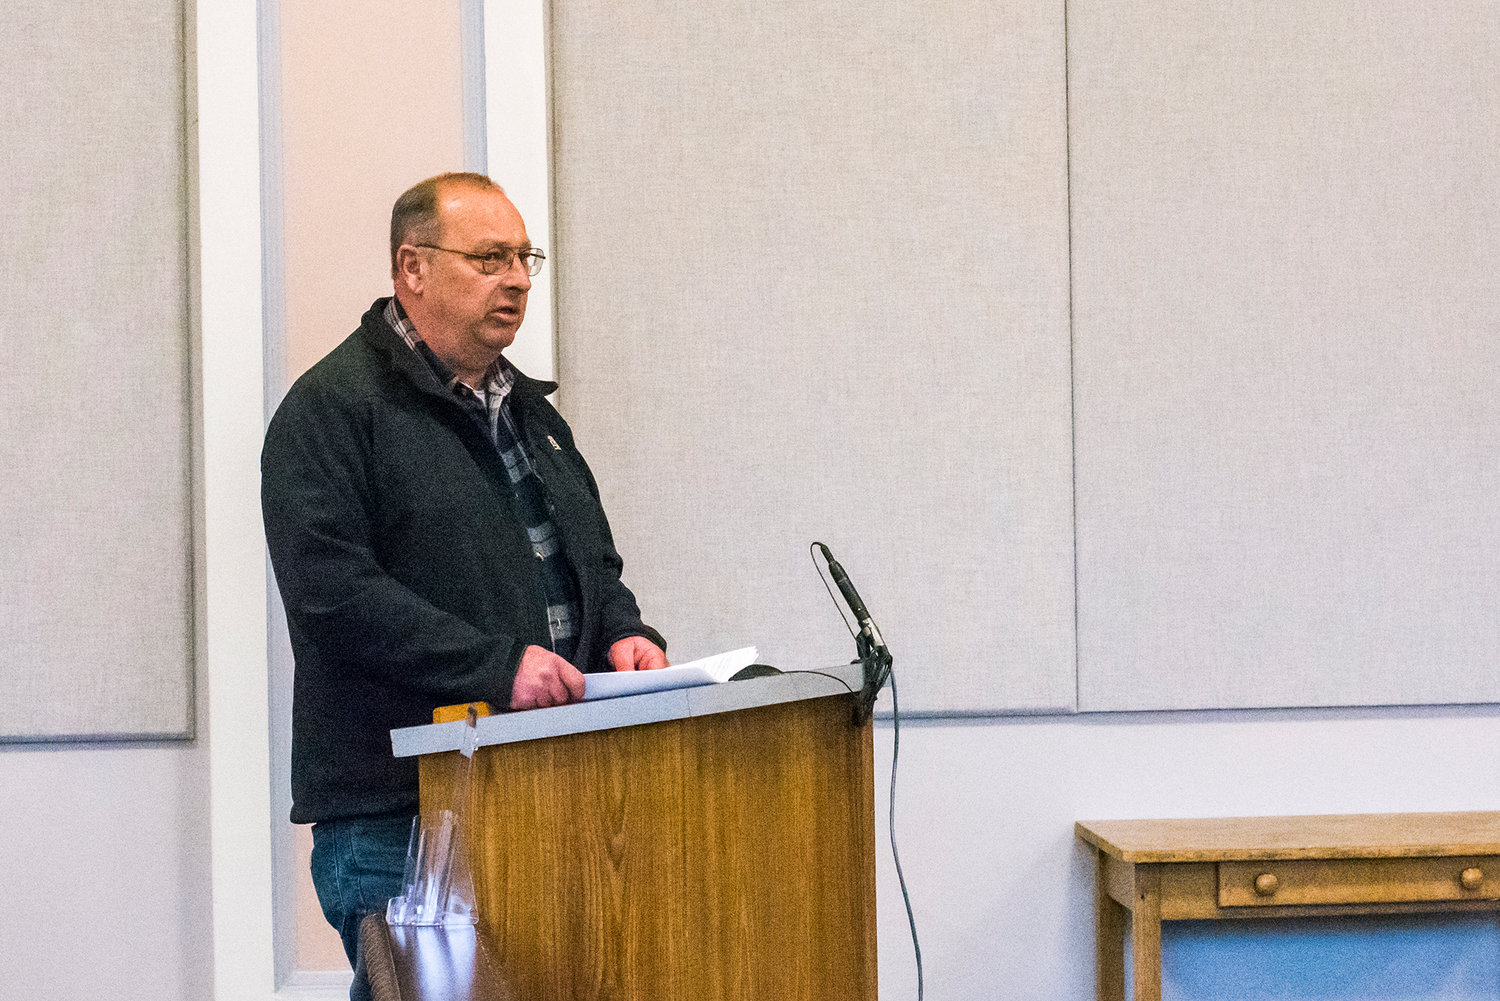 Bob Bozarth speaks in favor of a proposed ordinance that would make Lewis County a "sanctuary county" from gun regulations passed in Initiative 1639.